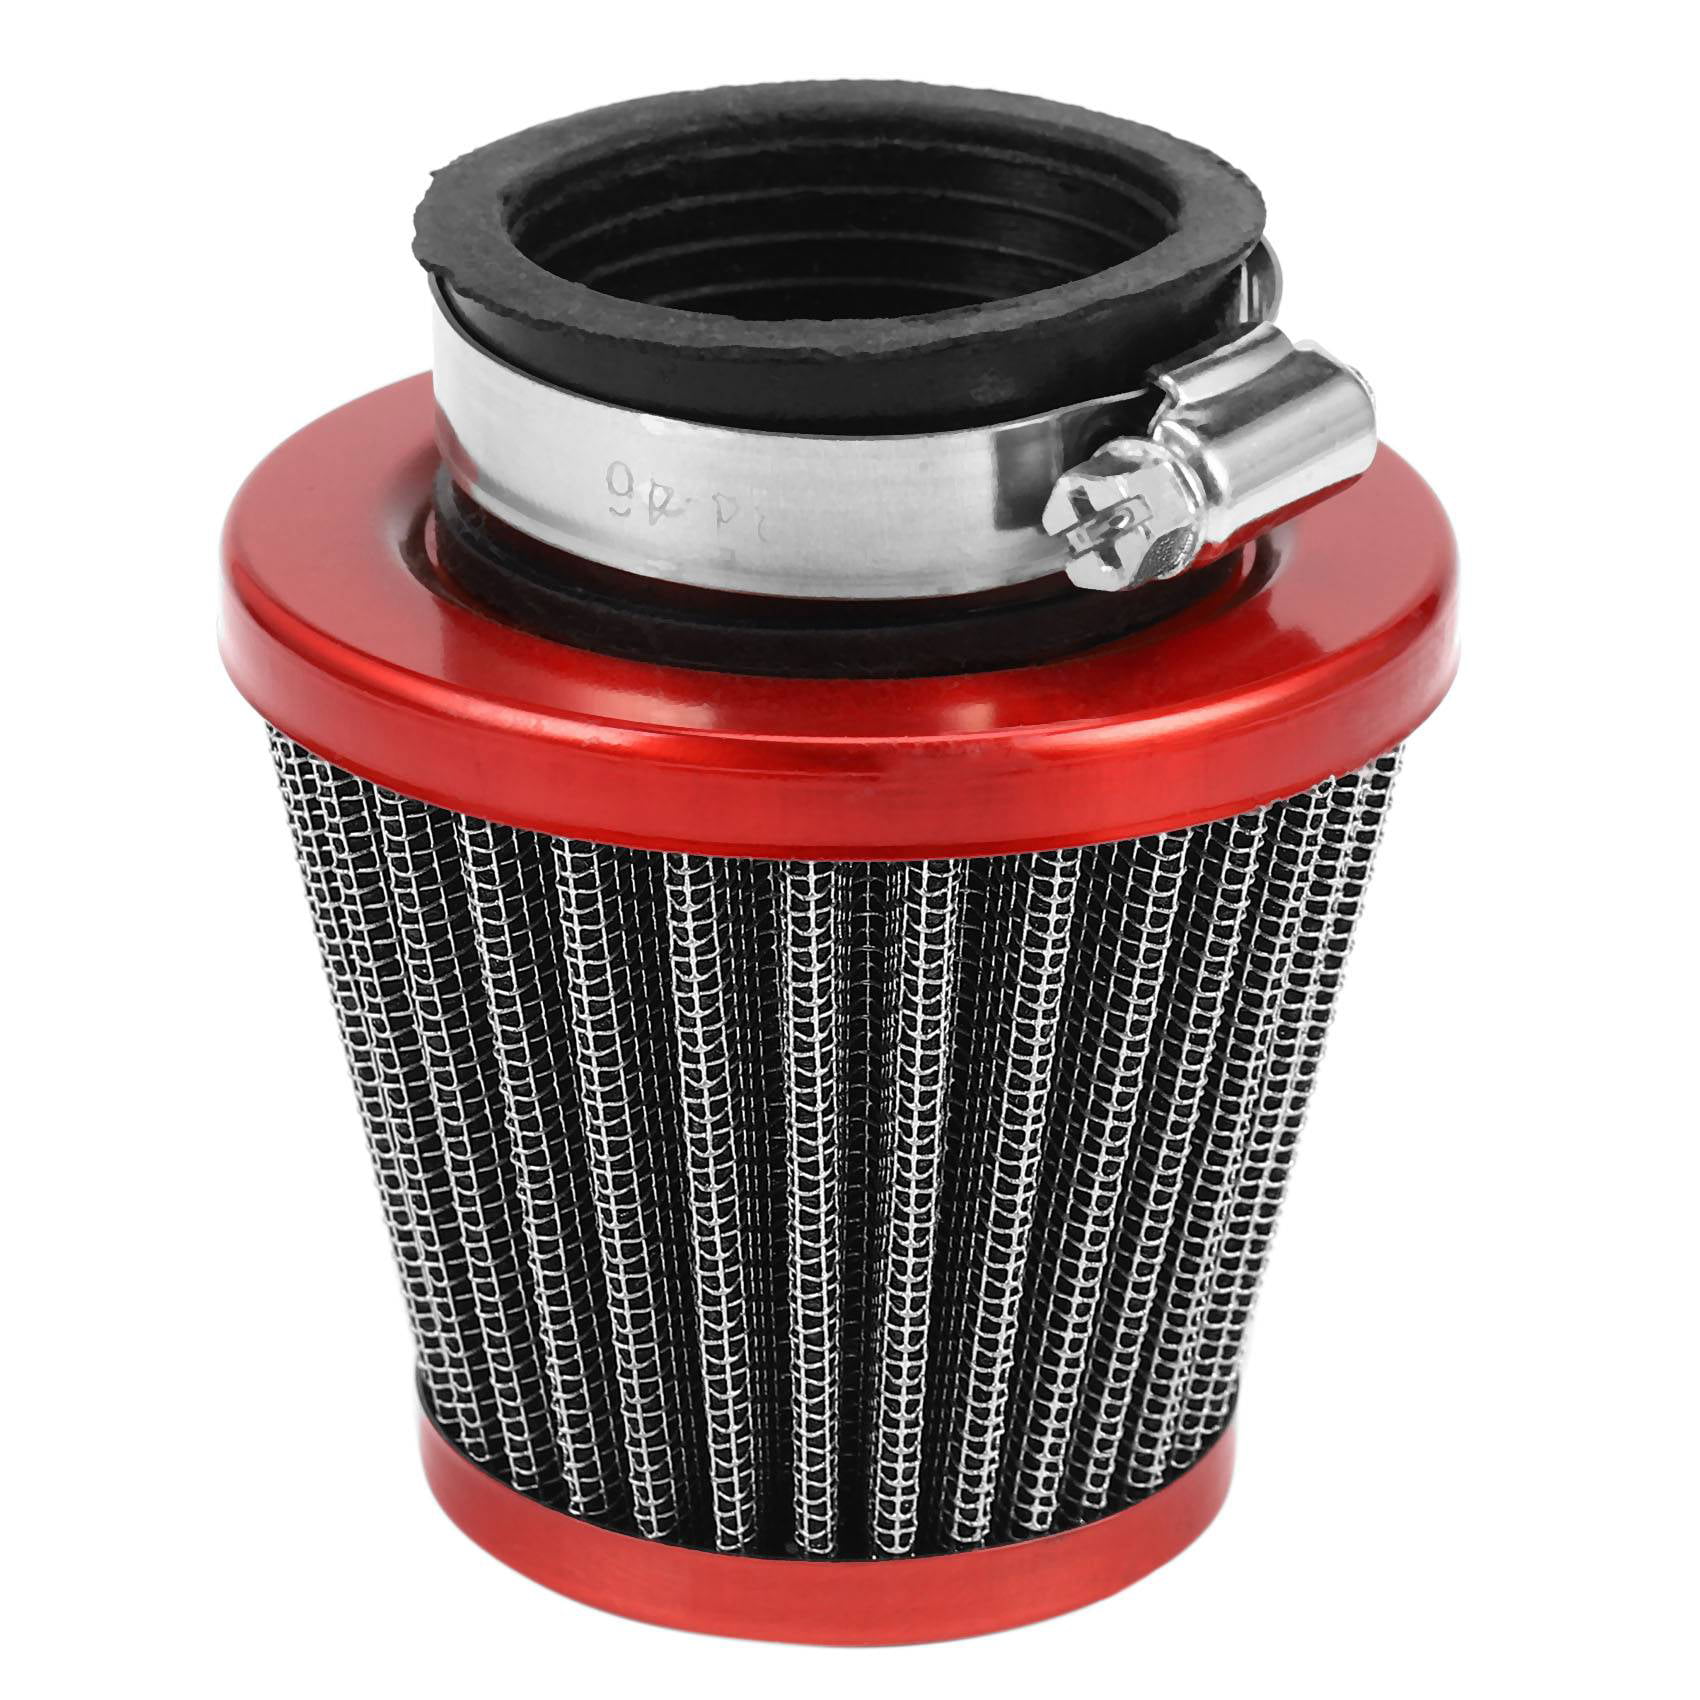 Suits 32-38mm Hose Size NEW Water Strainer Engine Water Tank Strainer 